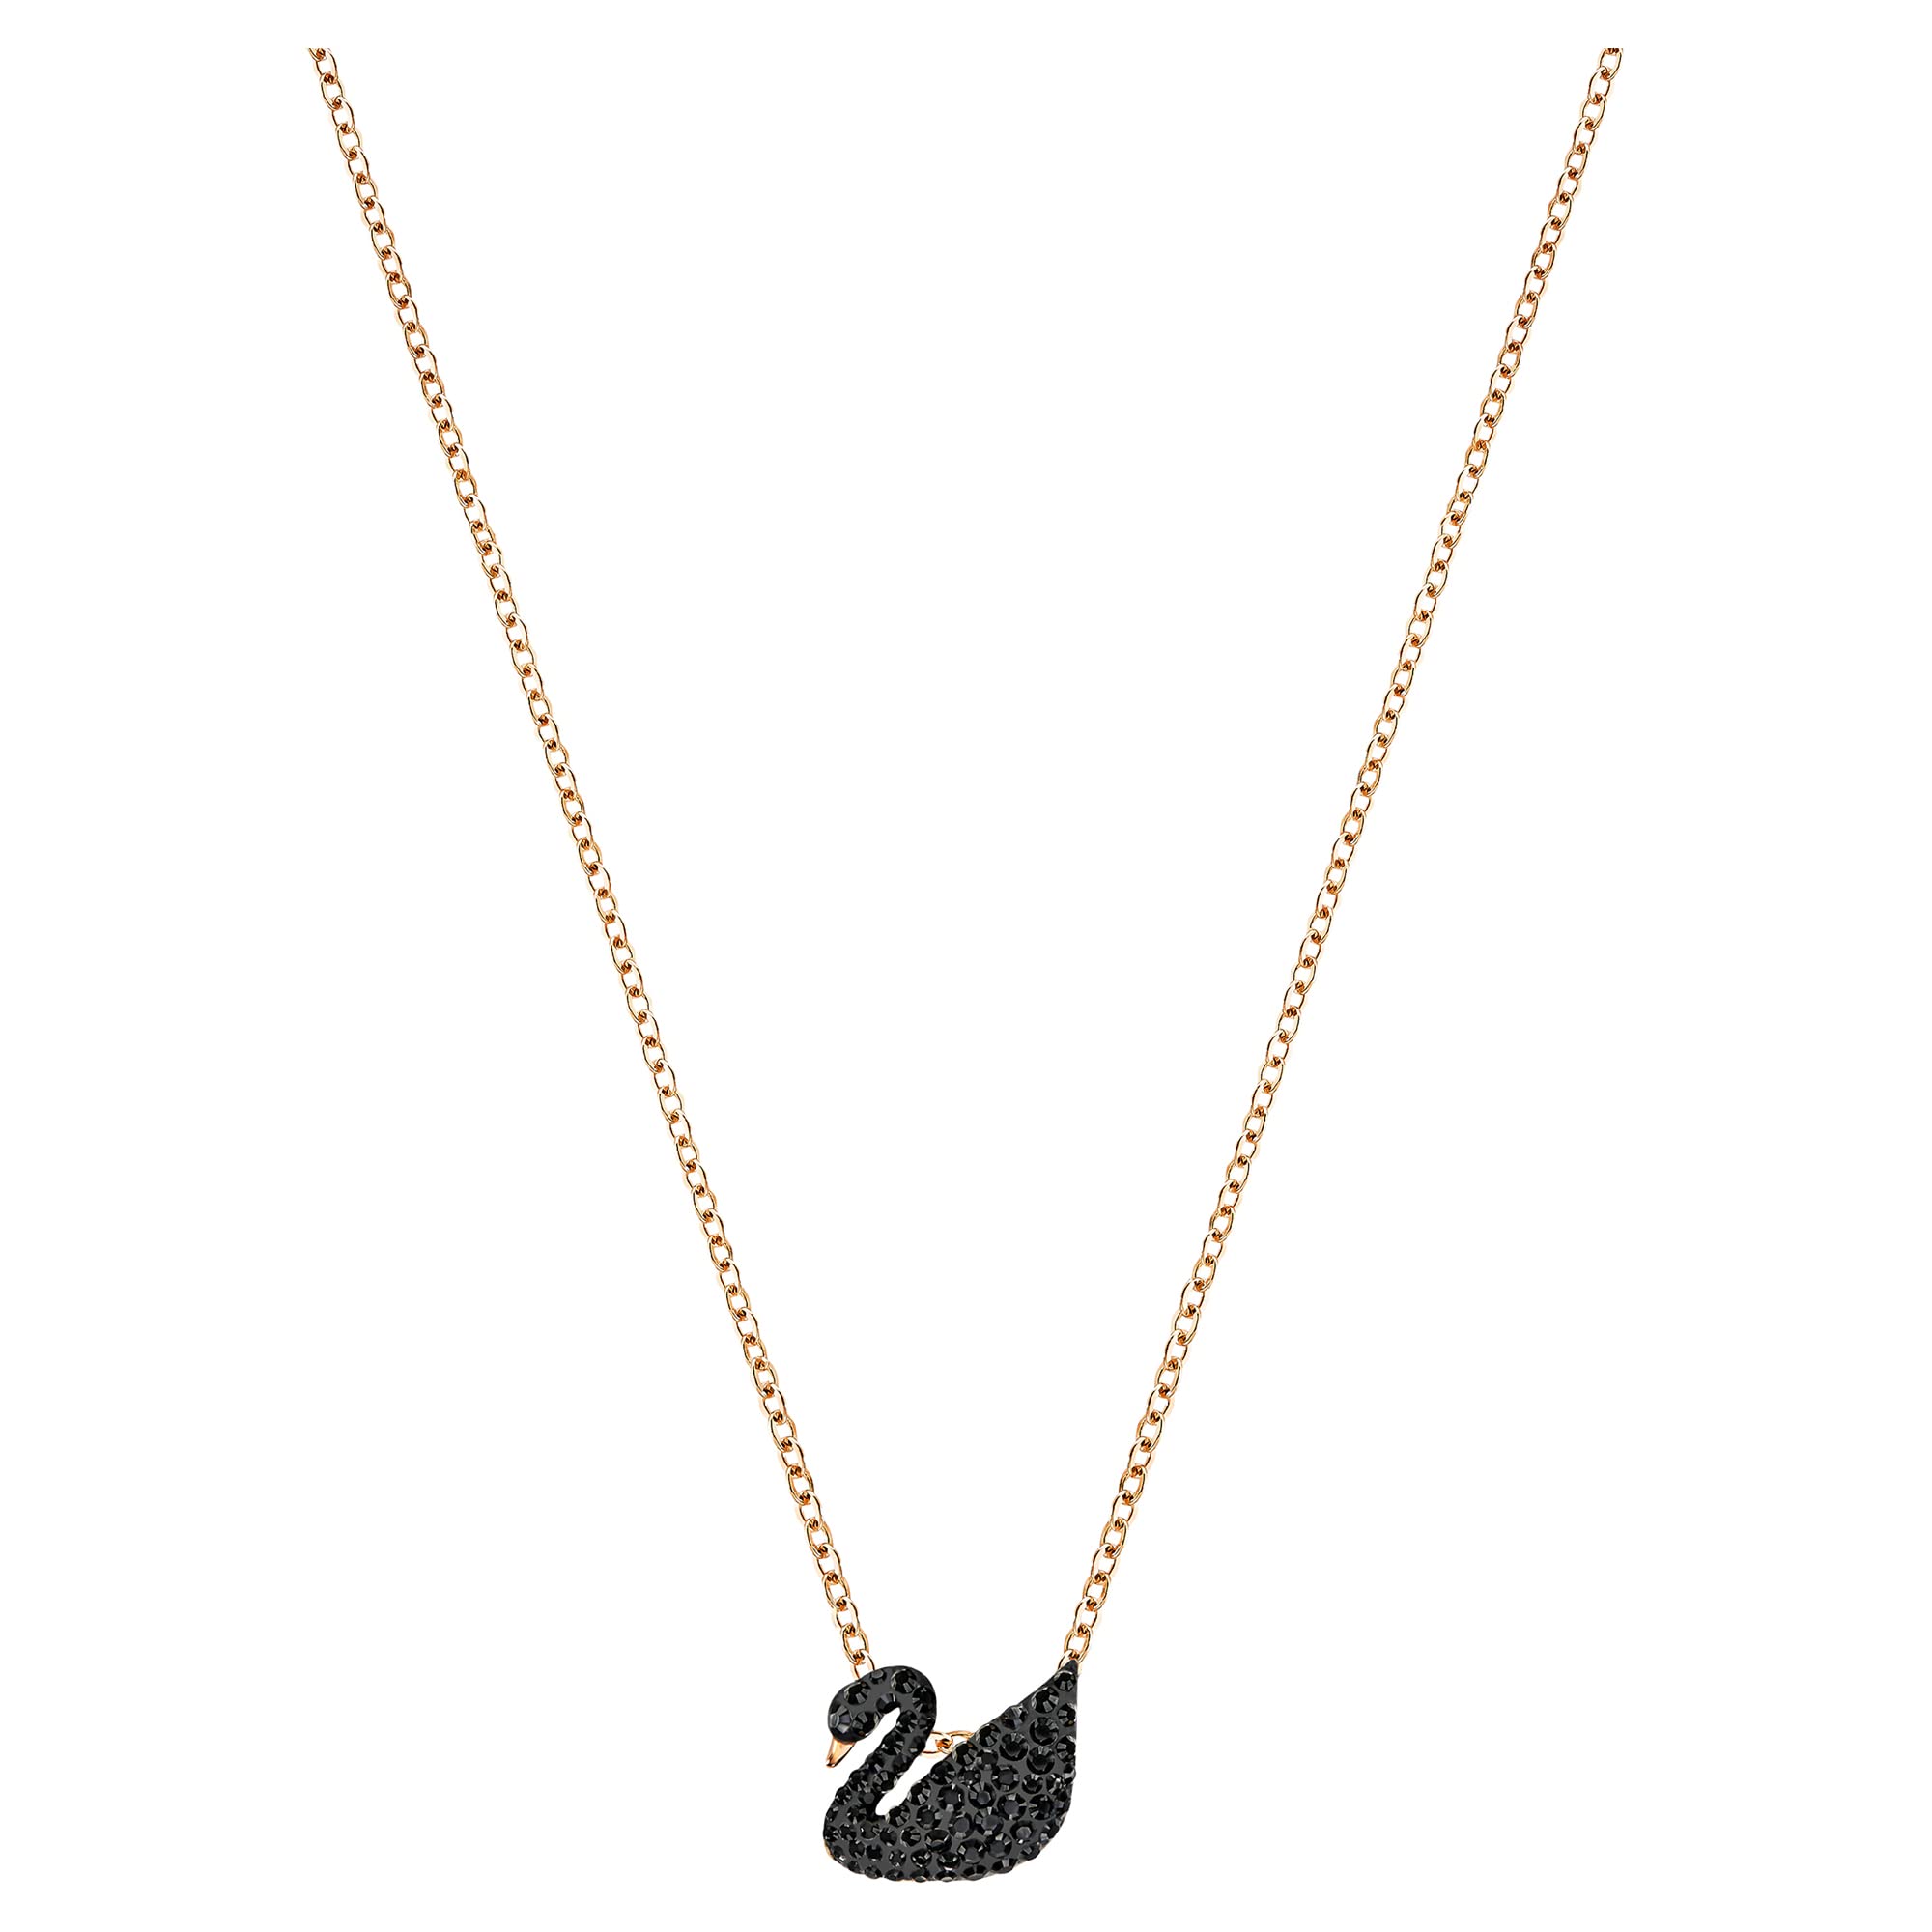 SWAROVSKI Iconic Swan Crystal Necklace Jewelry Collection